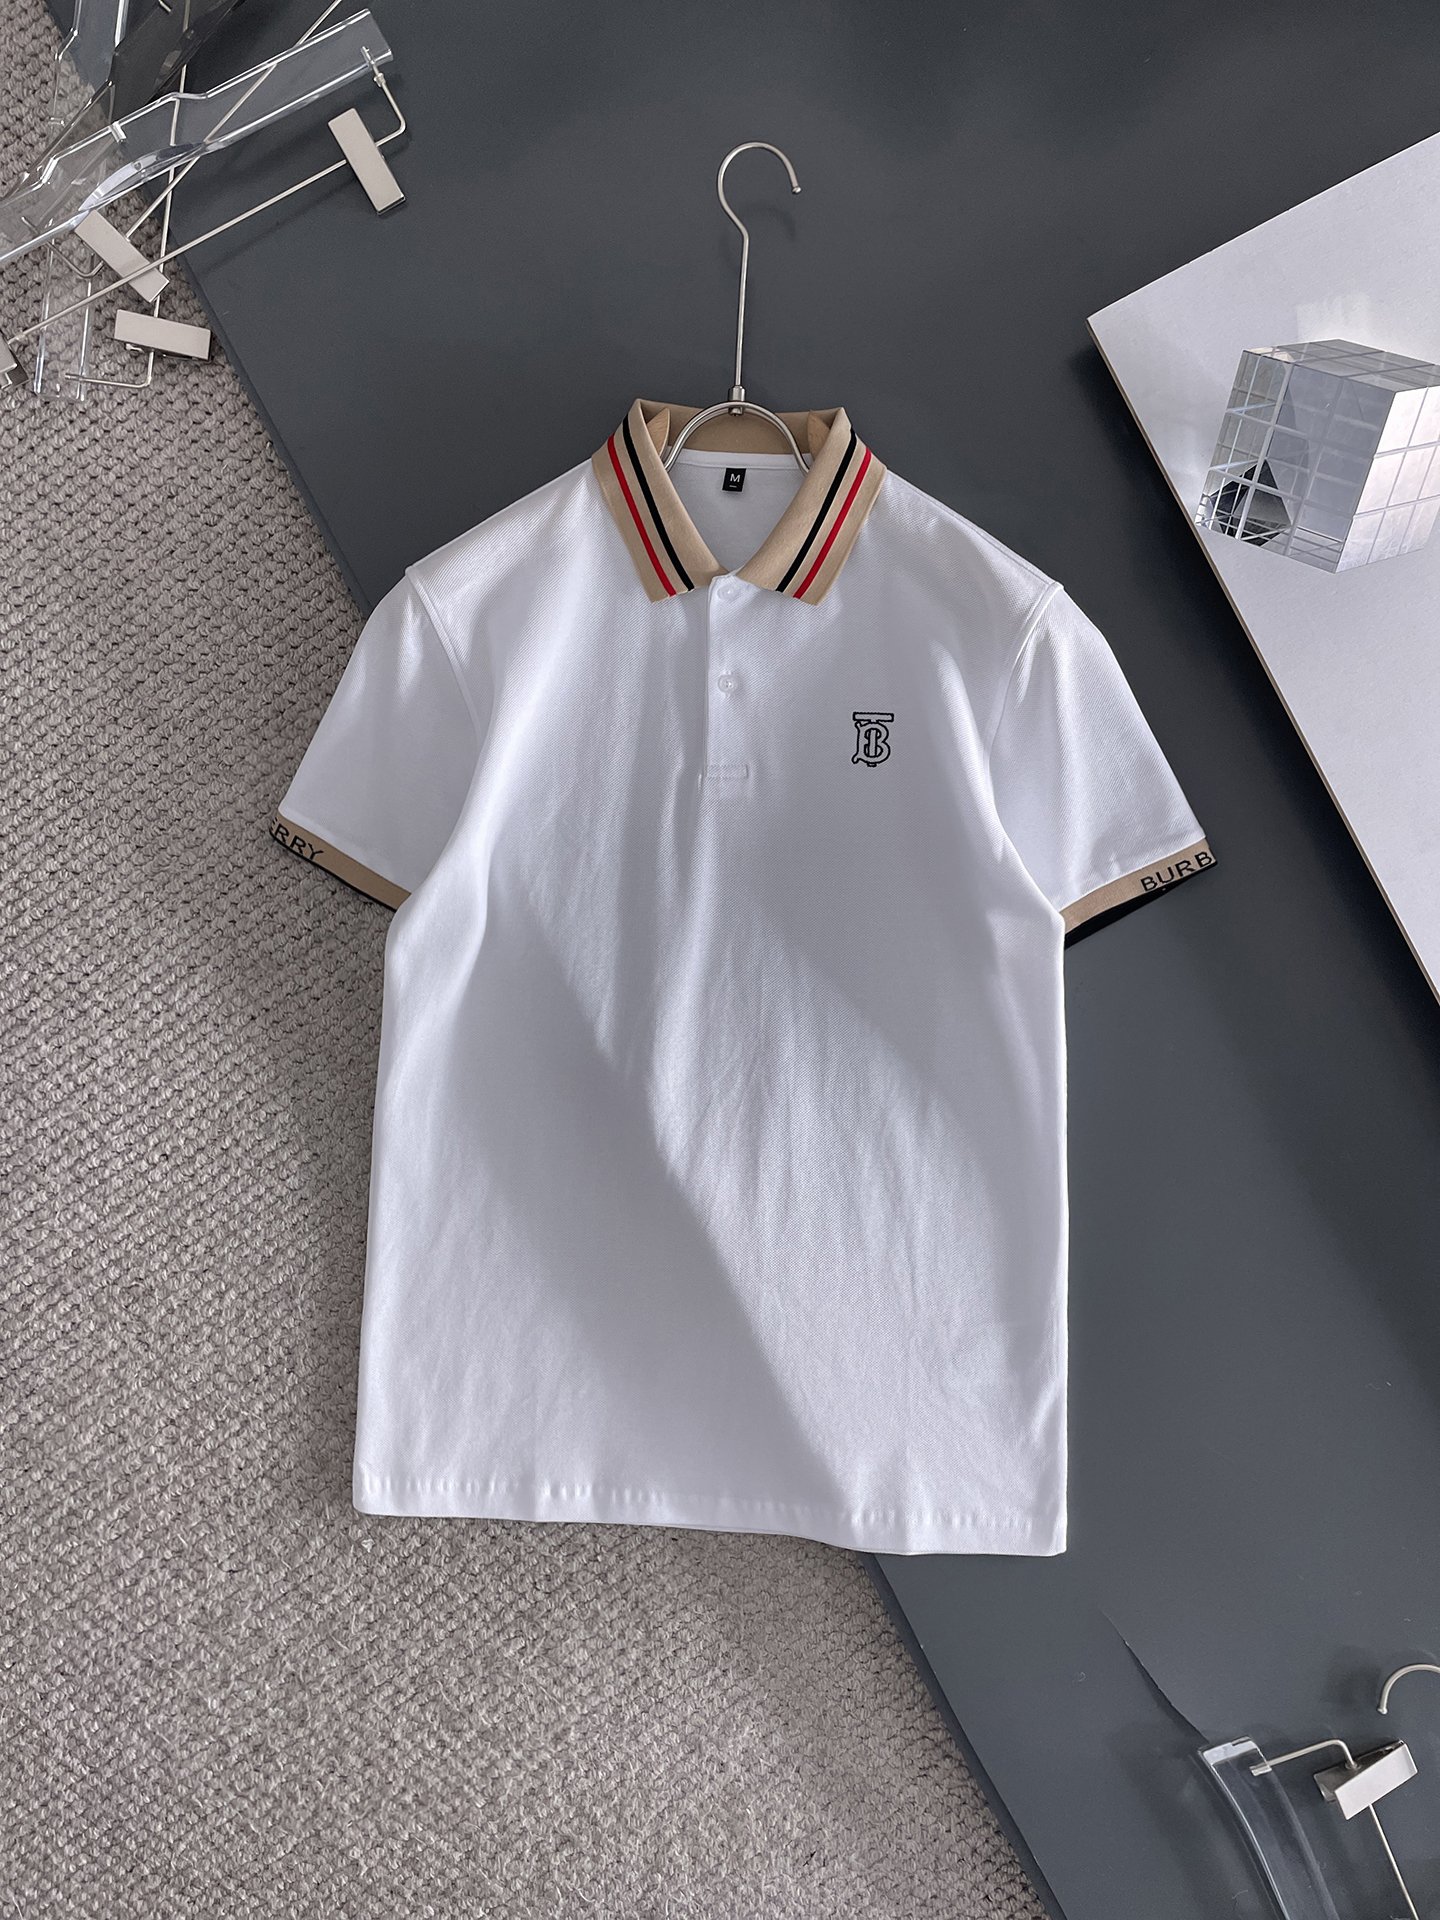 Burberry Clothing Polo High Quality Customize
 Men Cotton Summer Collection Fashion